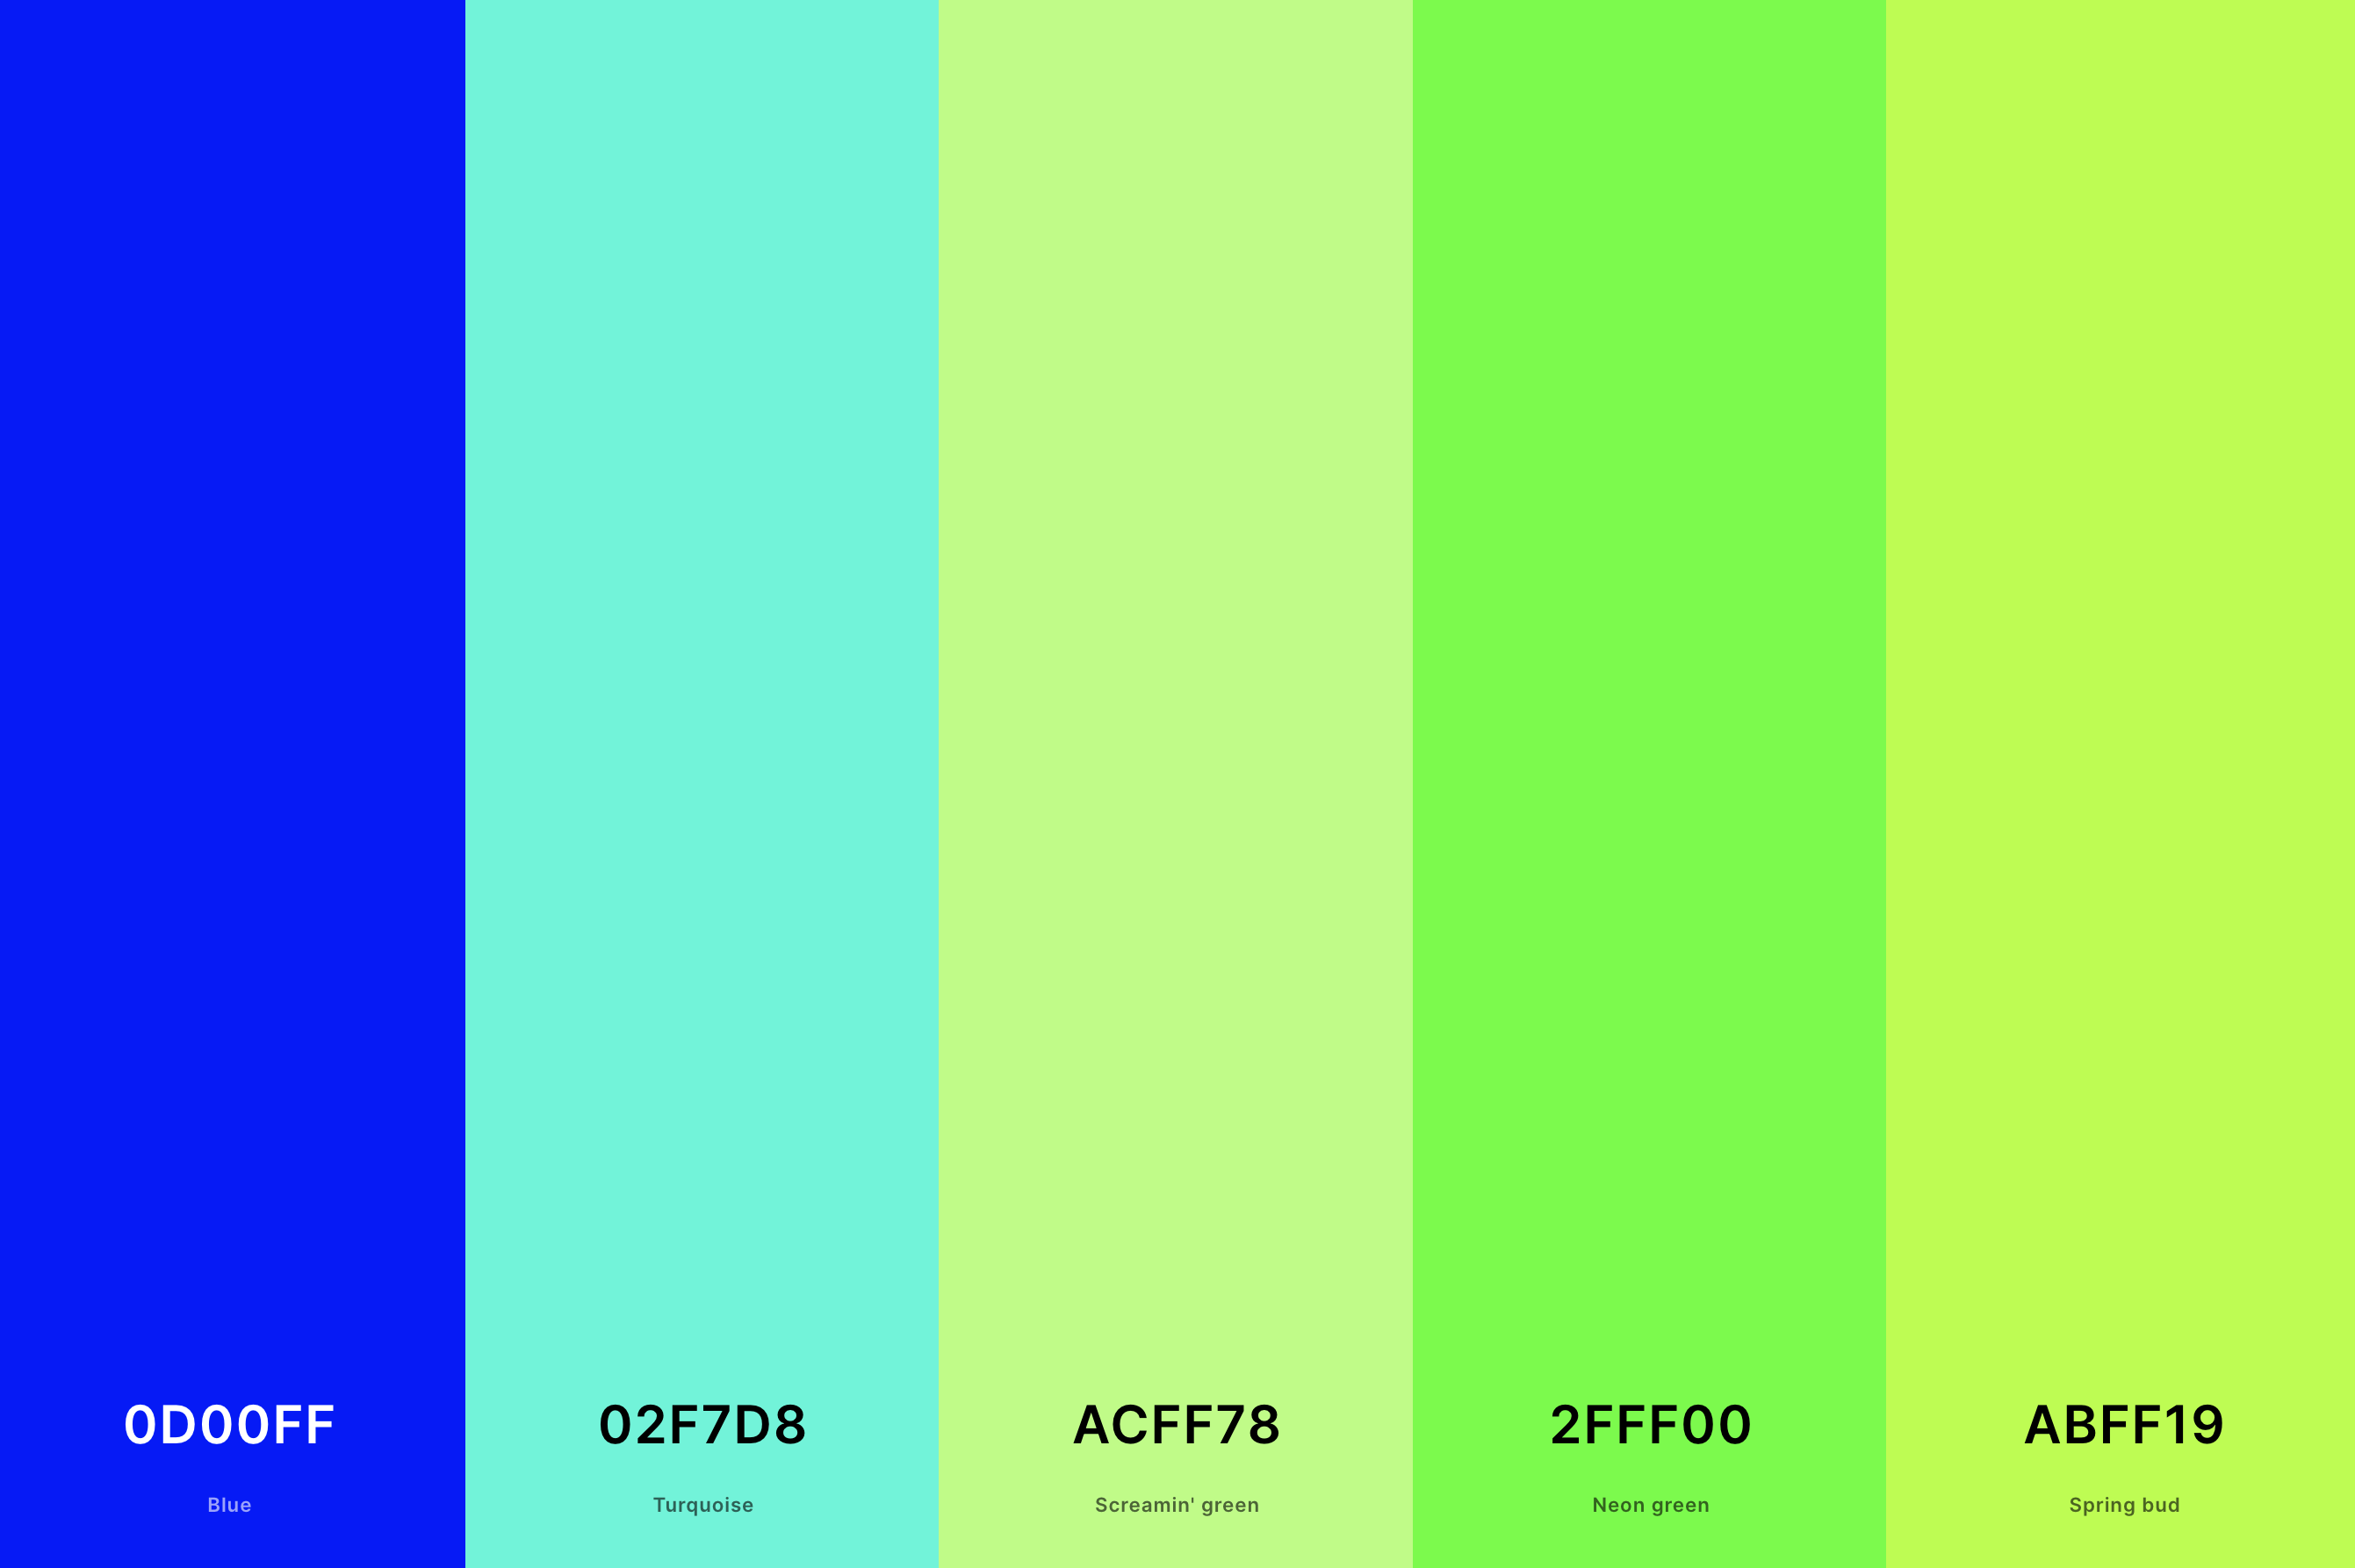 20. Neon Green And Blue Color Palette Color Palette with Blue (Hex #0D00FF) + Turquoise (Hex #02F7D8) + Screamin' Green (Hex #ACFF78) + Neon Green (Hex #2FFF00) + Spring Bud (Hex #ABFF19) Color Palette with Hex Codes